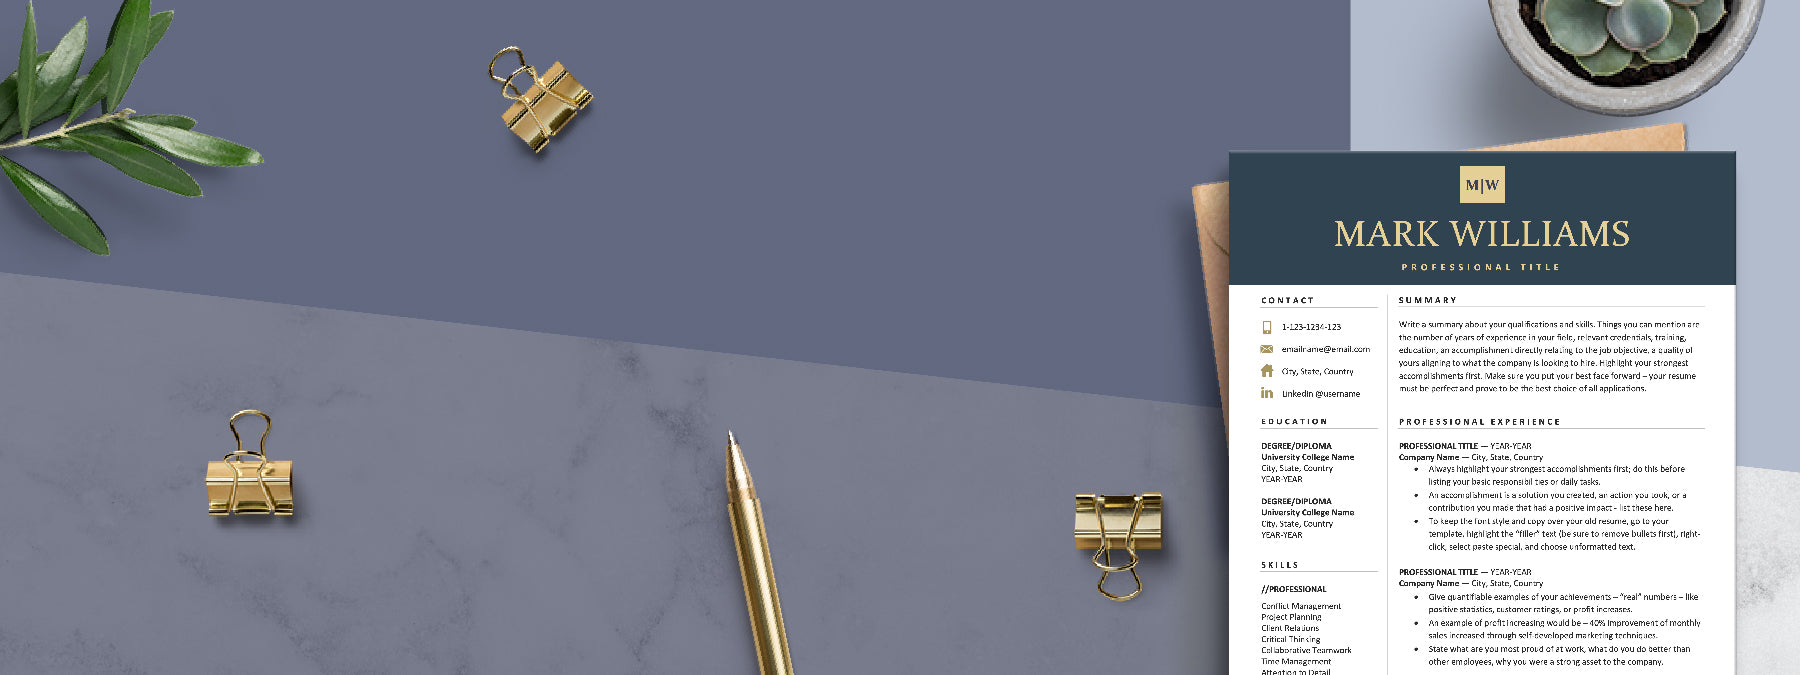 The Art of Resume Design Company- Resume Template Design on a desk with a gold pen and clips